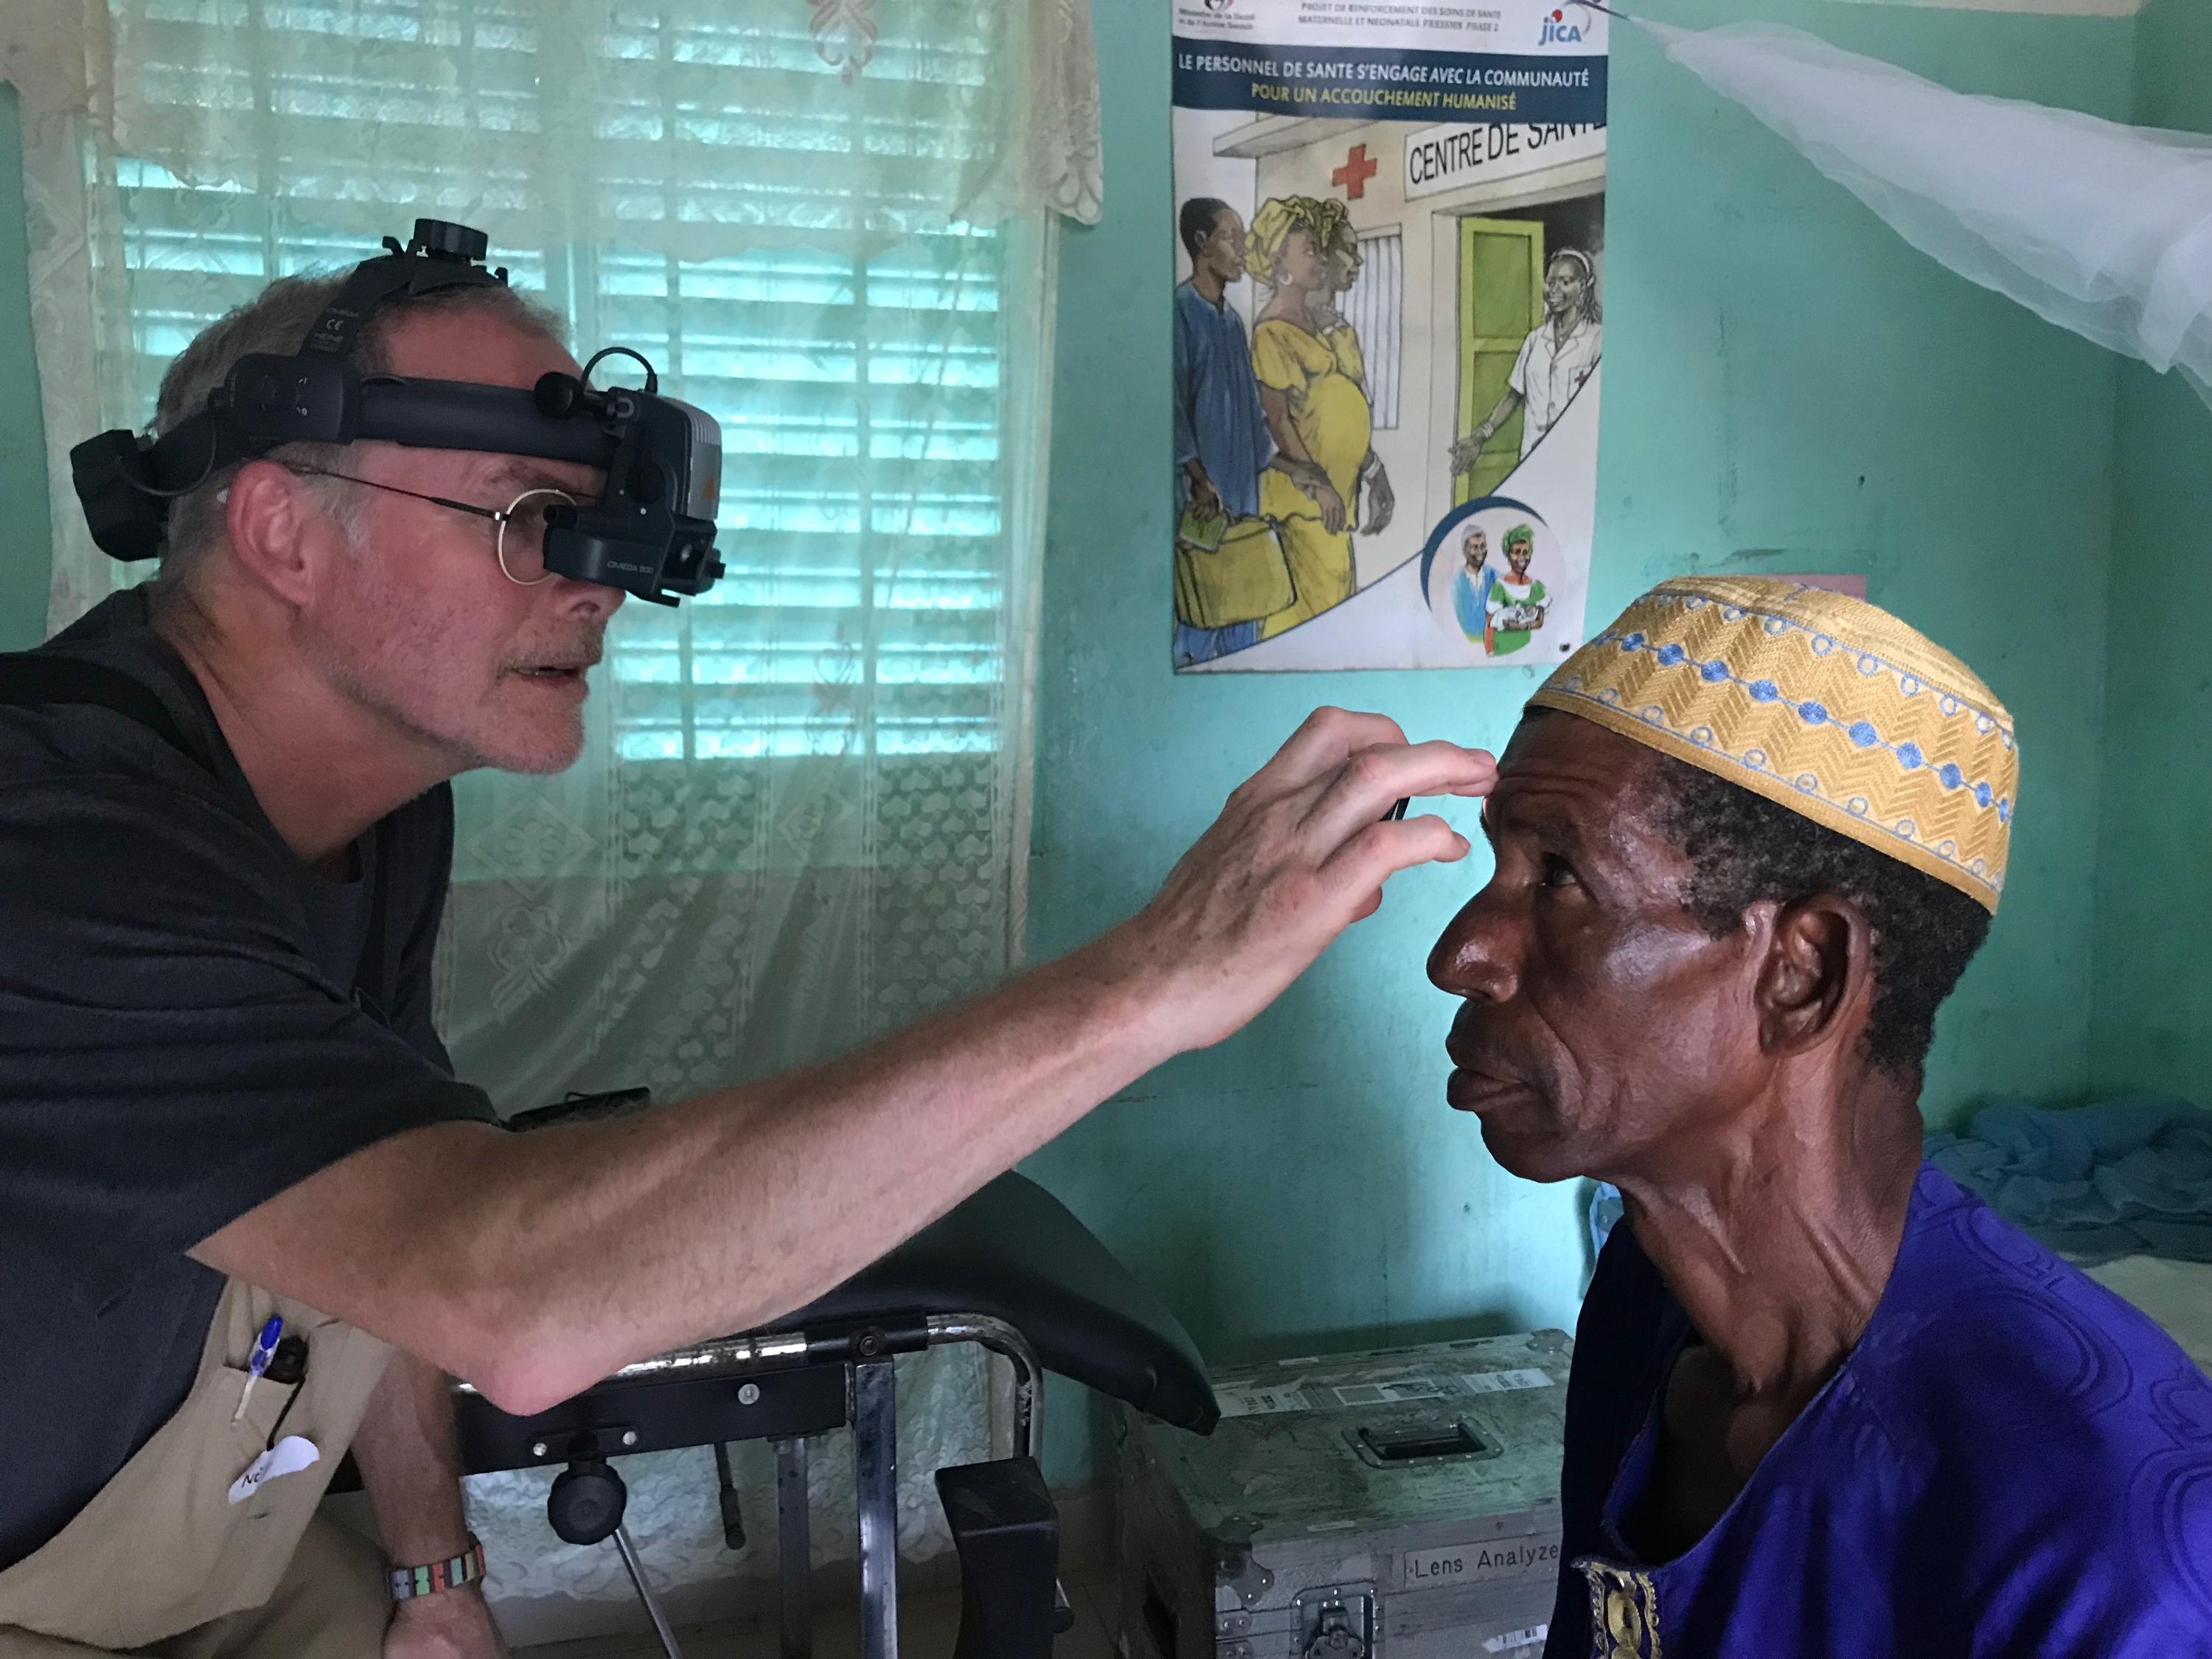 Dr. Neil Paterson completes an eye exam during the clinics